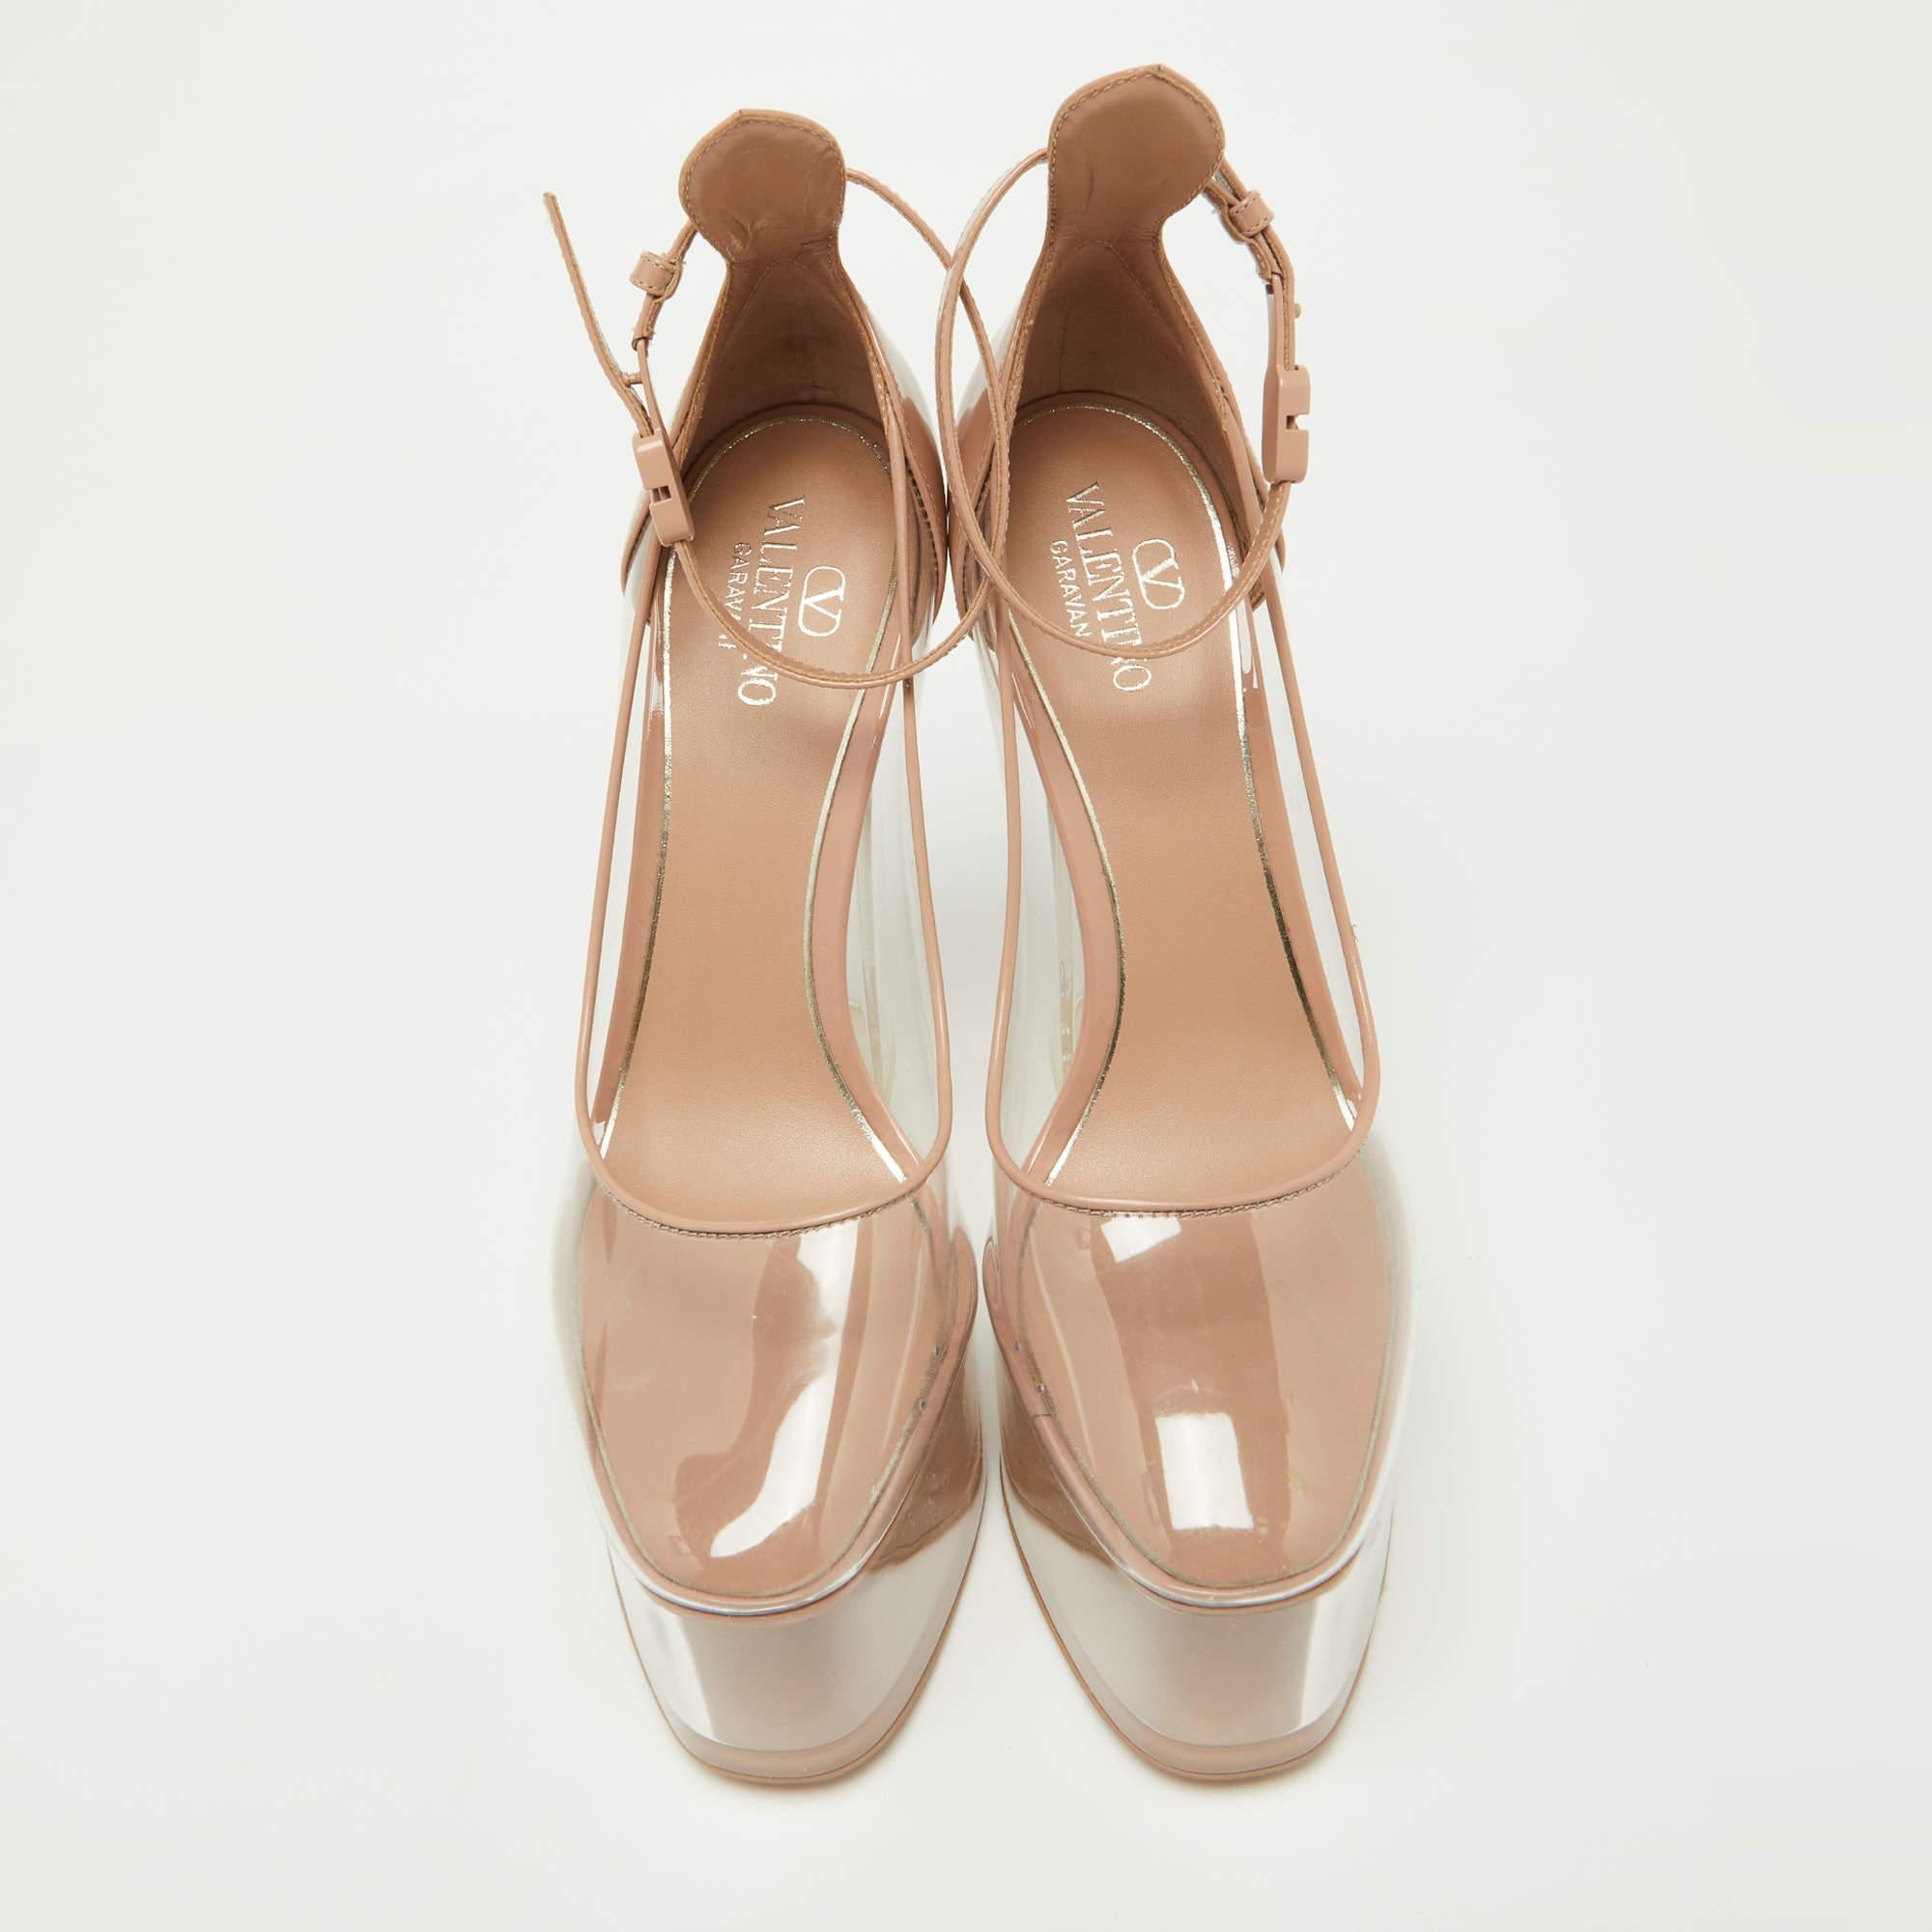 Exuding femininity and elegance, these Tan-Go pumps feature a chic silhouette with an attractive design. You can wear these pumps for a stylish look.

Includes
Original Dustbag